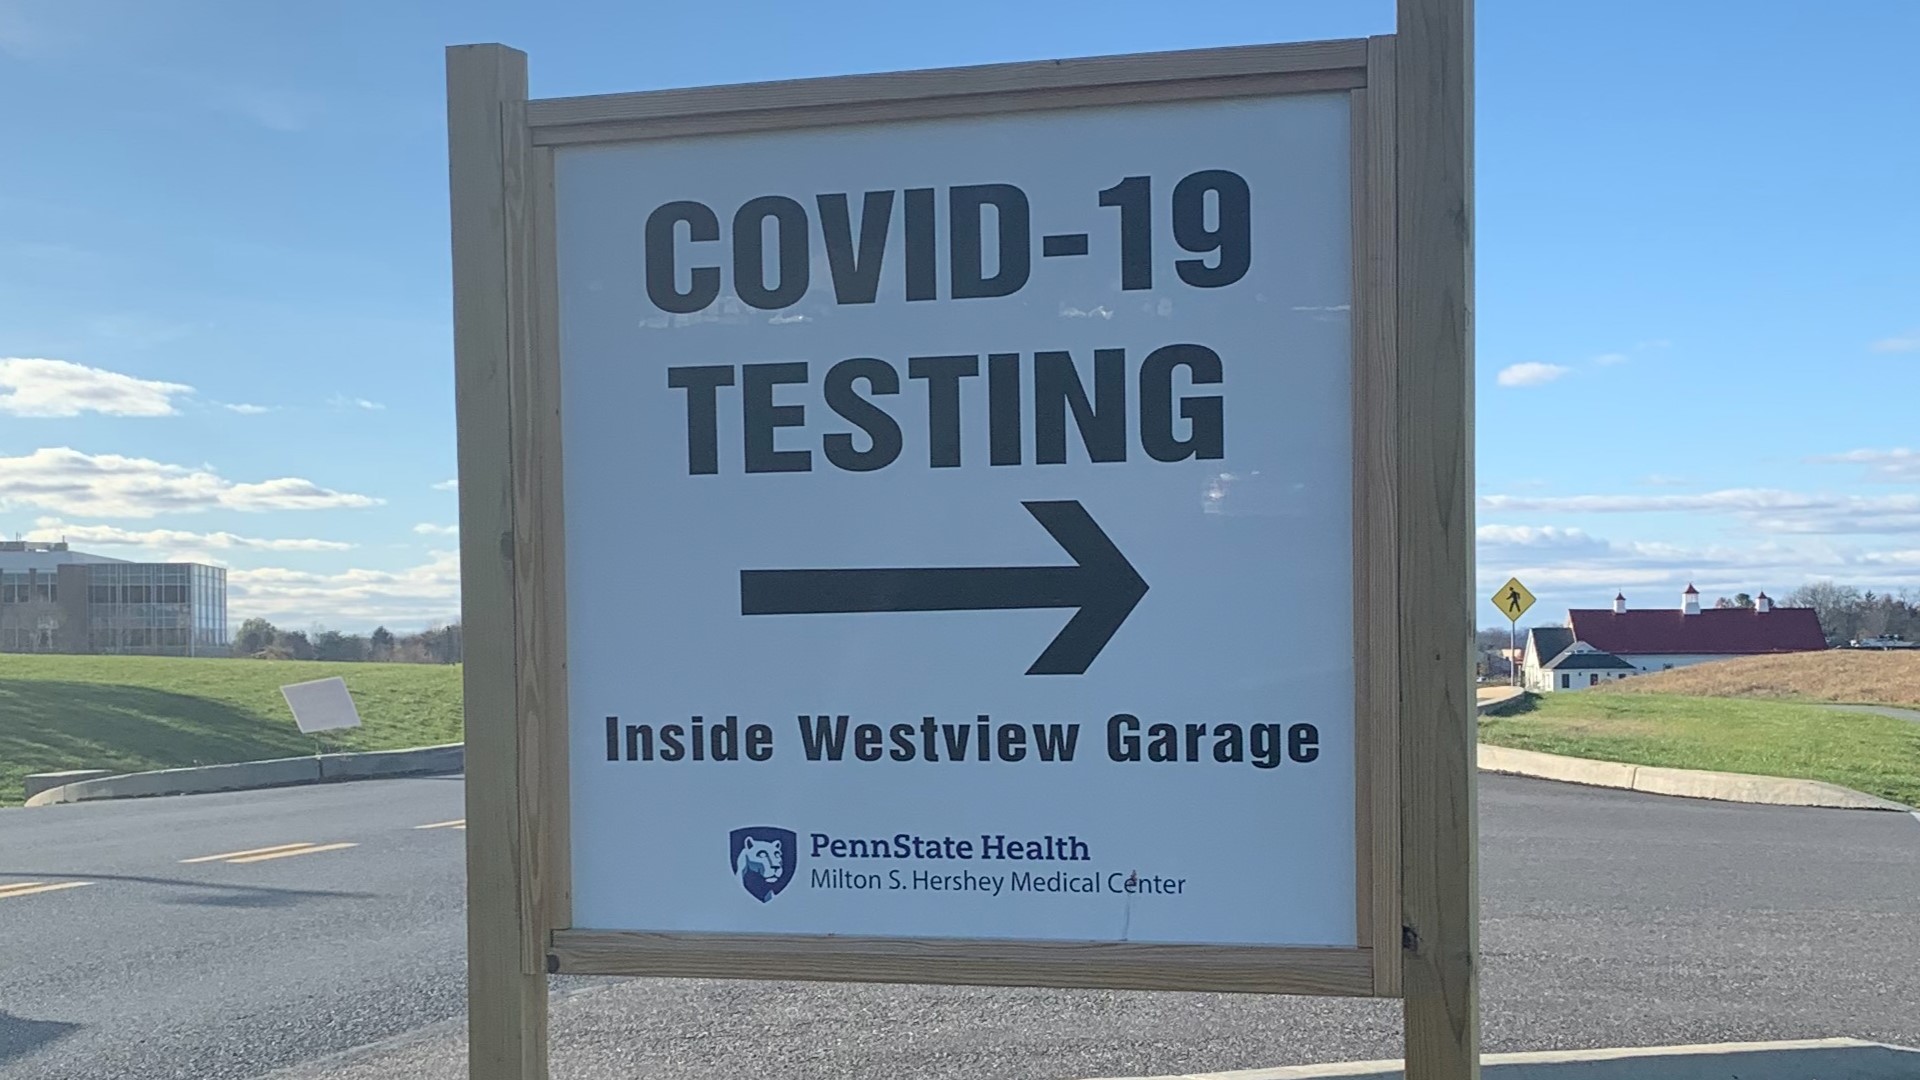 PA Dept. of Health partnered with AMI Expeditionary Healthcare to test for COVID-19. Week 1, they conducted more than 7,000 tests. Week 12, less than 300 got tested.